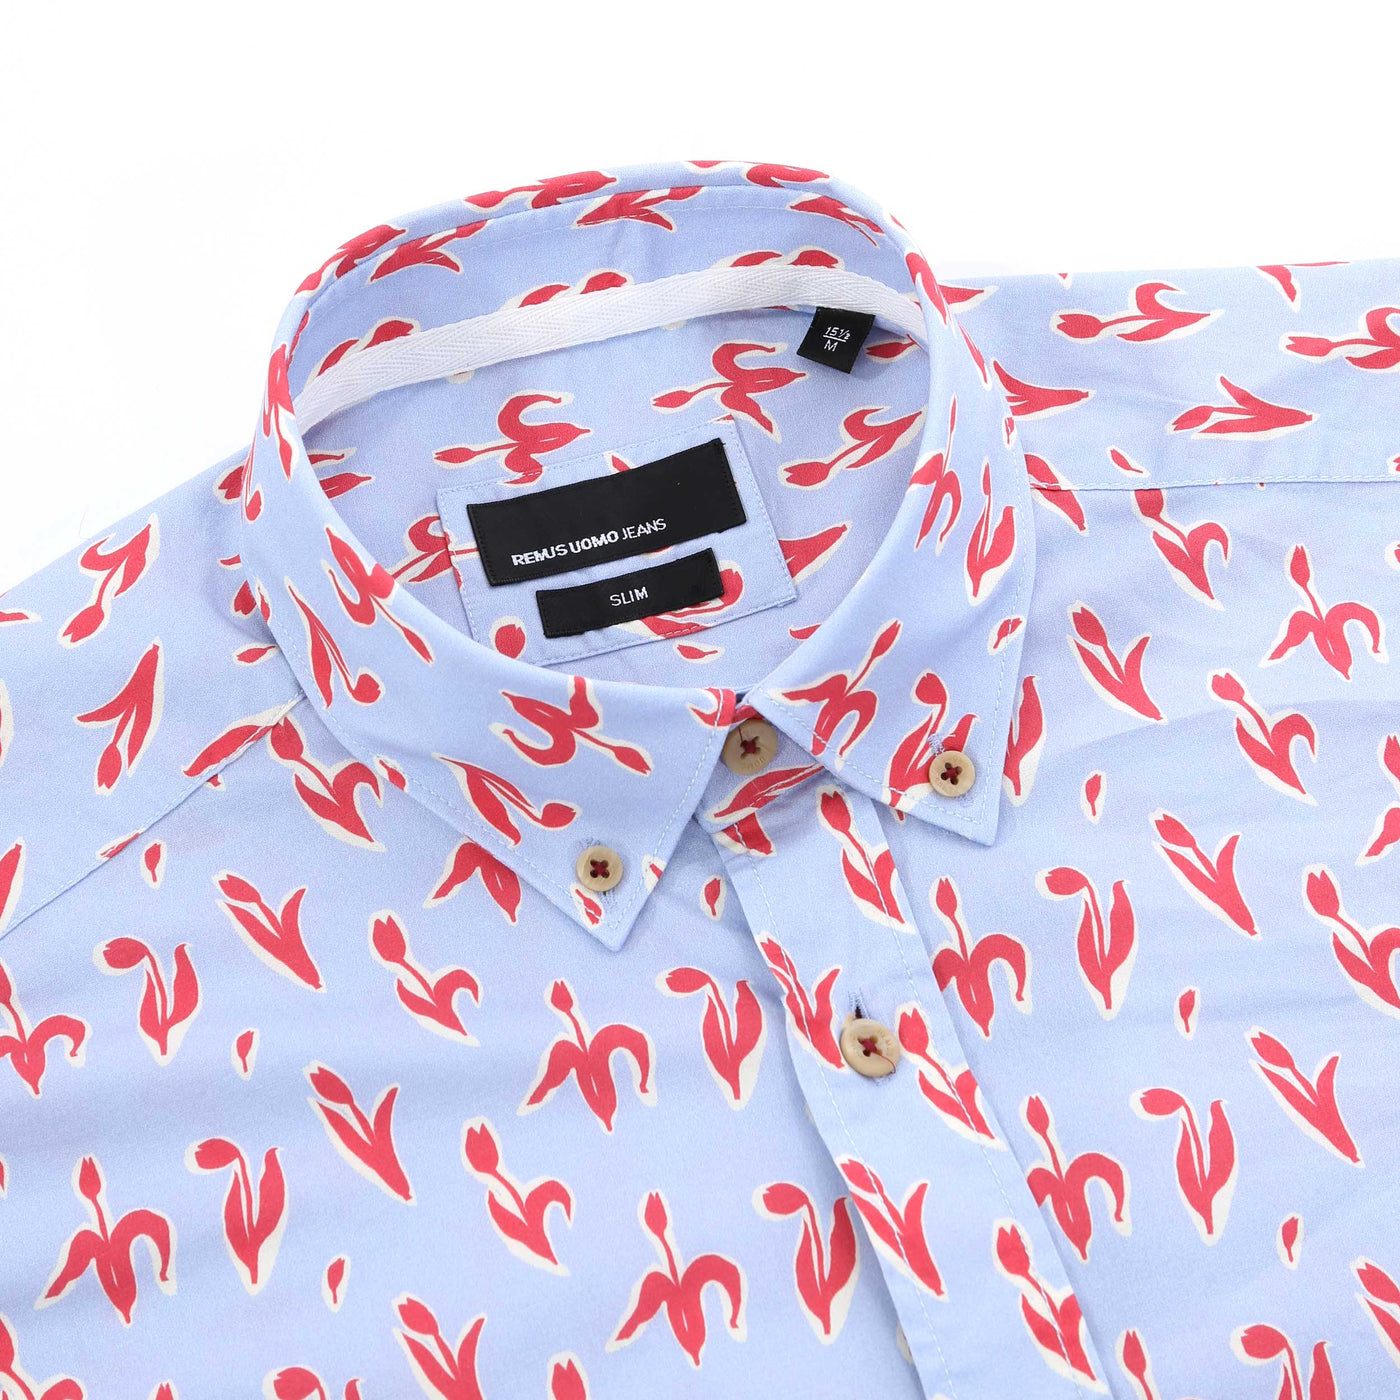 Remus Uomo Small Floral Print Short Sleeve Shirt in Sky Blue & Red Collar